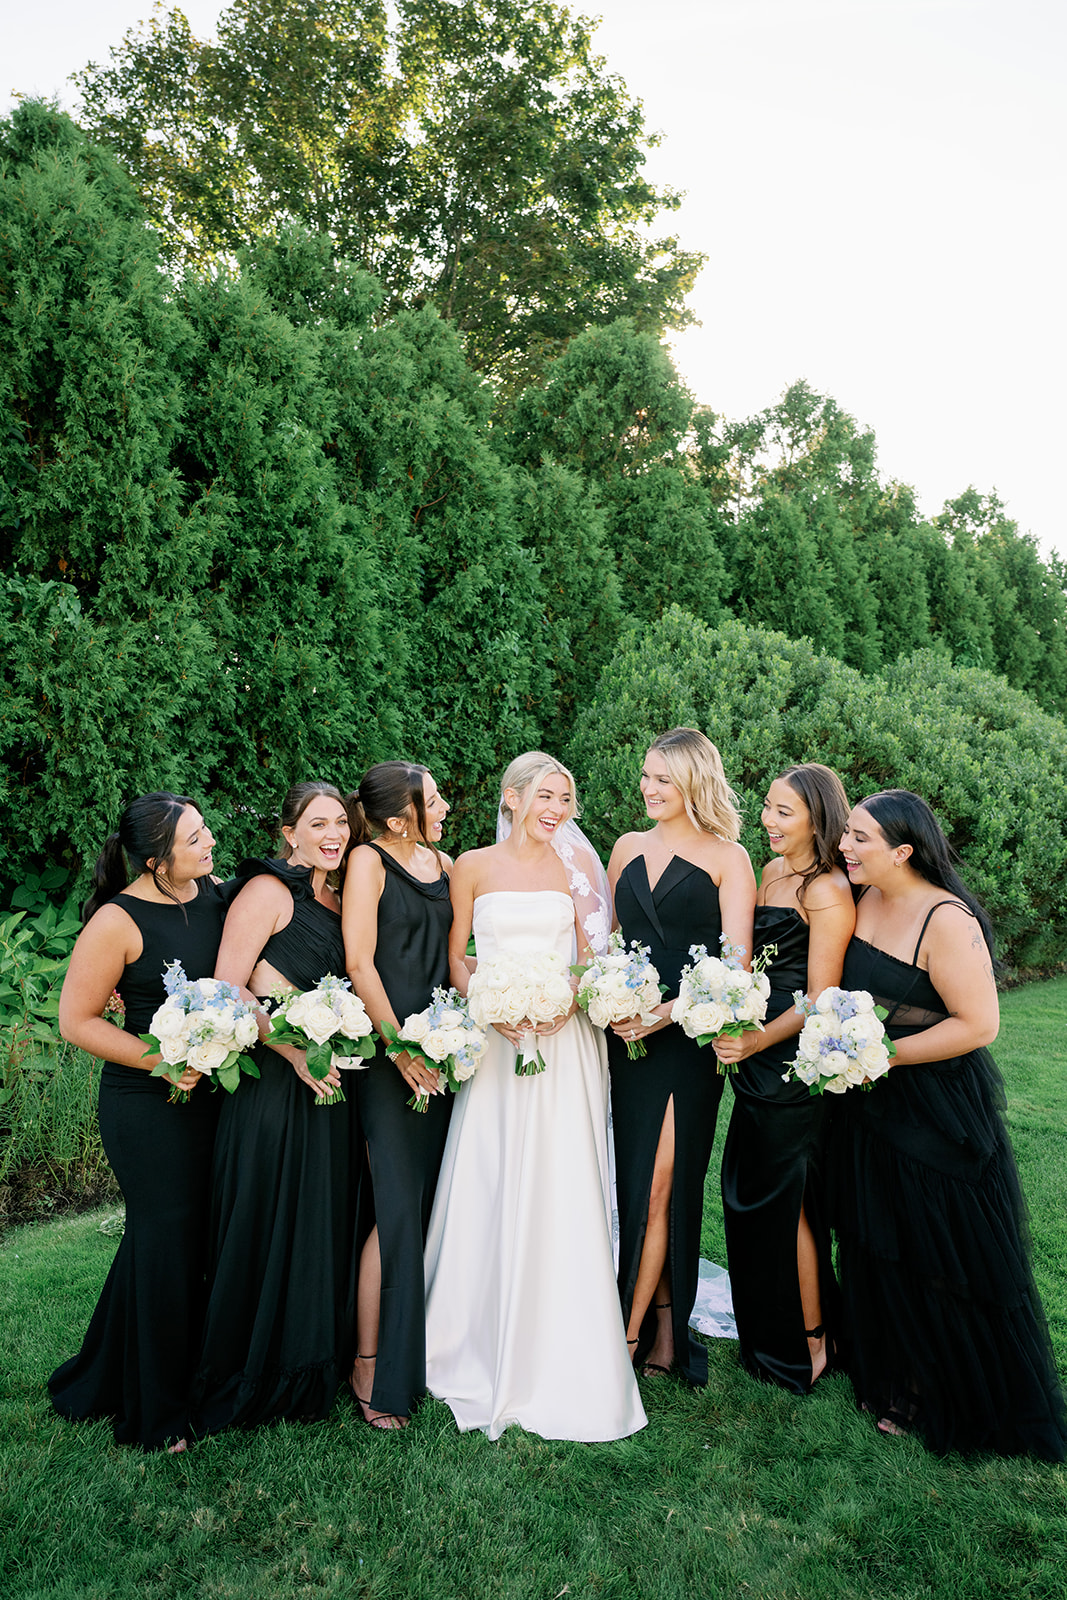 Candid bride and bridesmaid portrait with mismatched black bridesmaid dresses.  